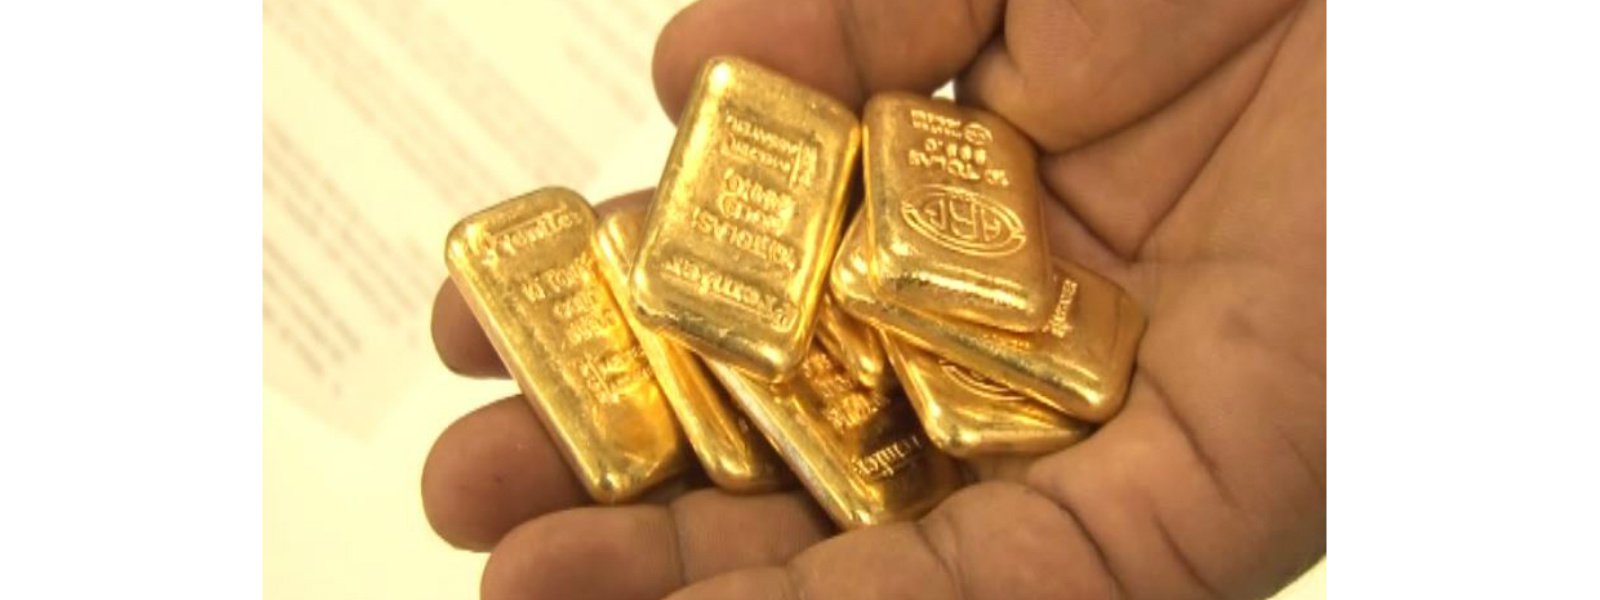 Local nabbed at BIA for attempting to smuggle gold